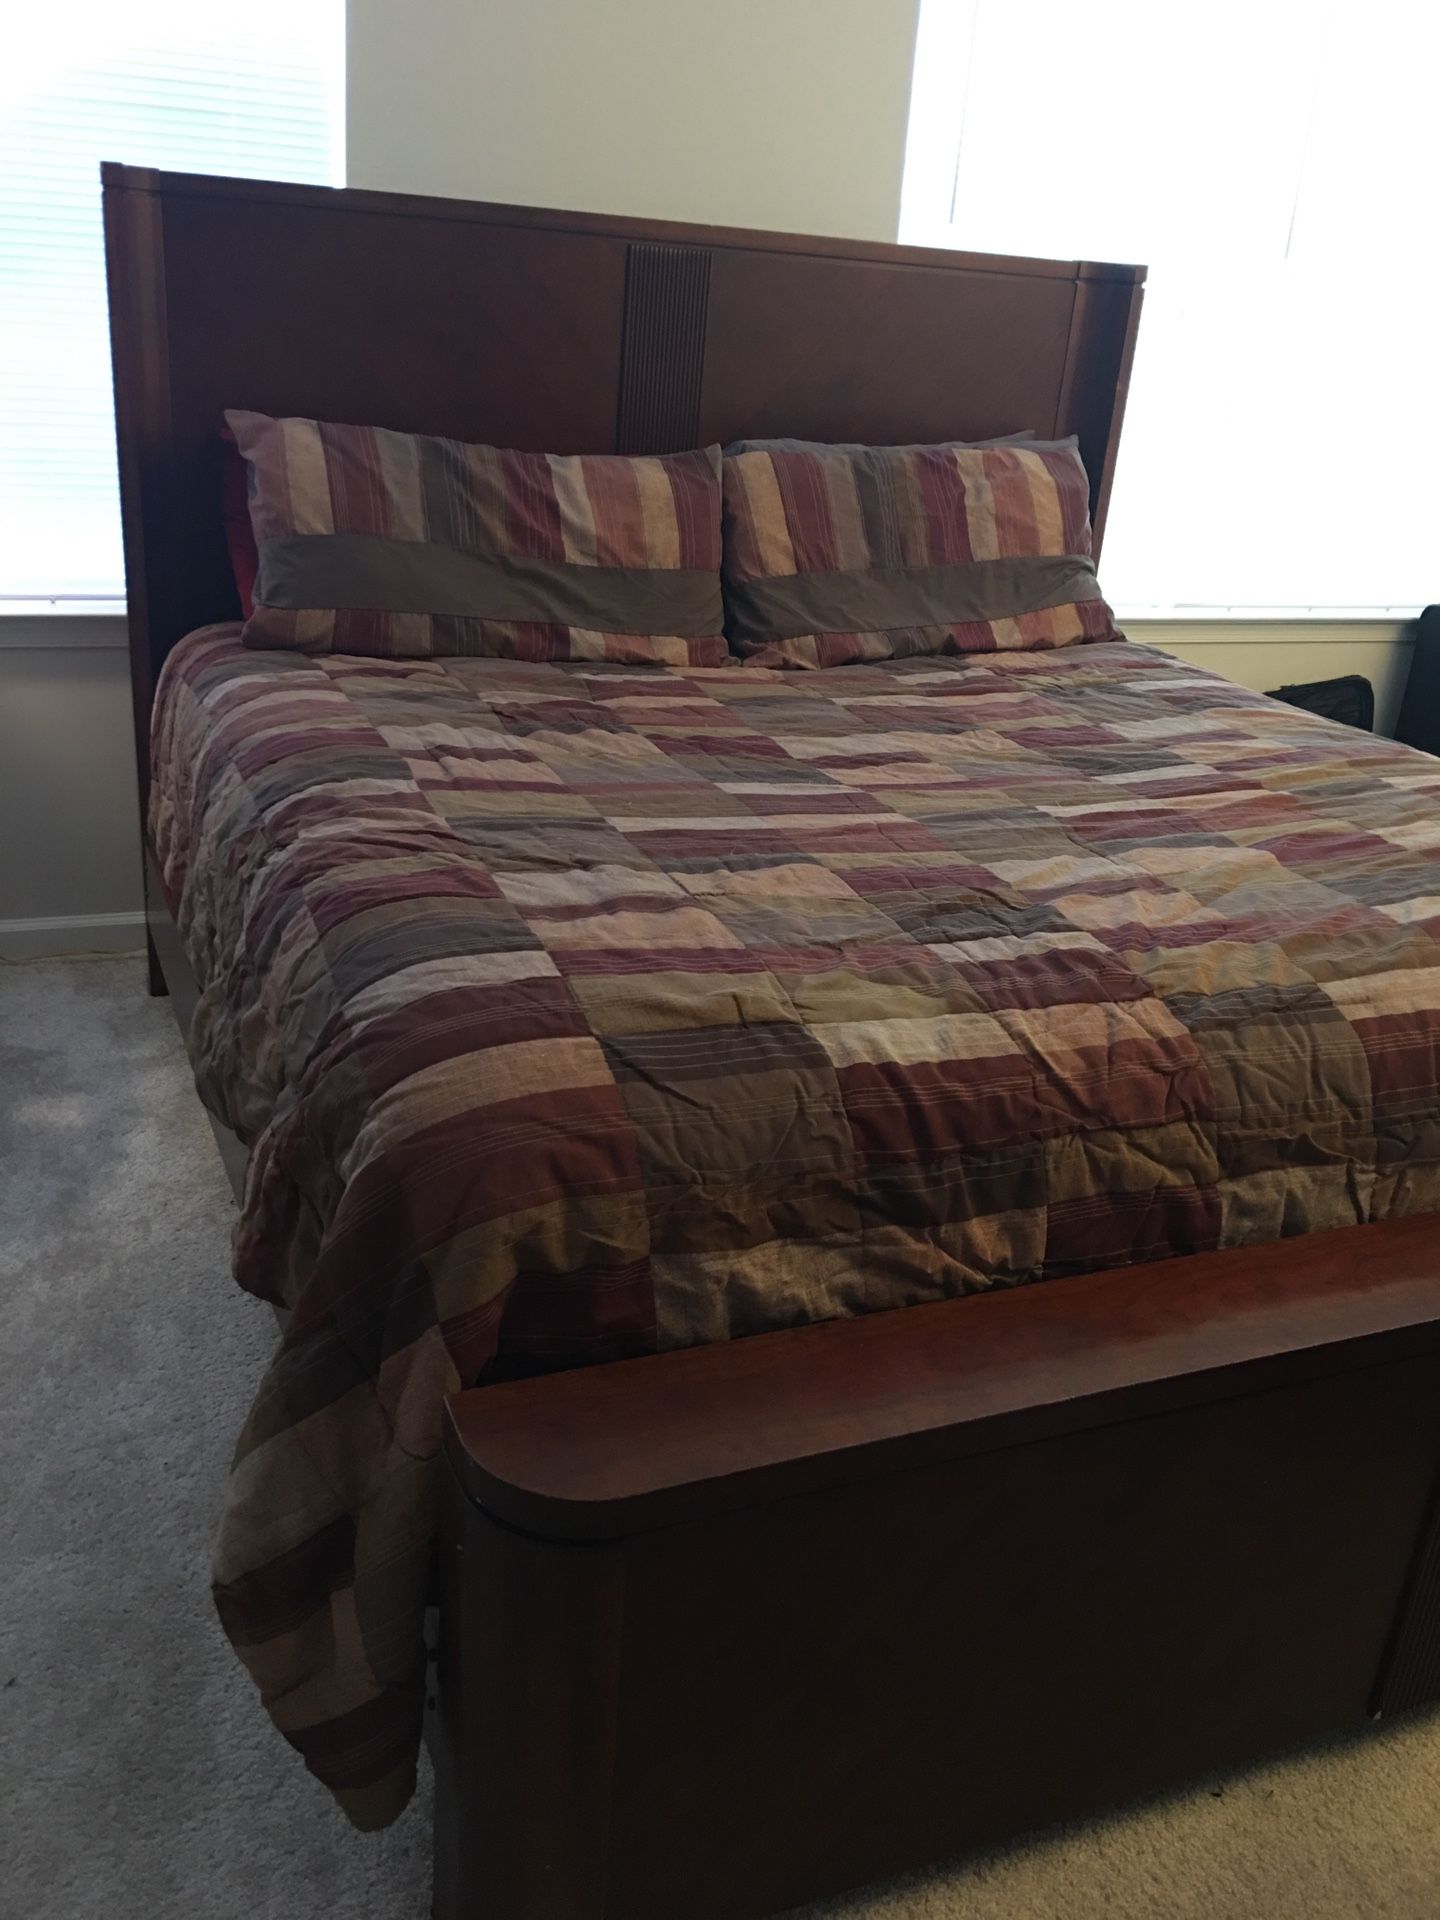 King Panel Bed + Great Sealy Mattress (Quick Sale-Moving) SATURDAY SALE ONLY $250